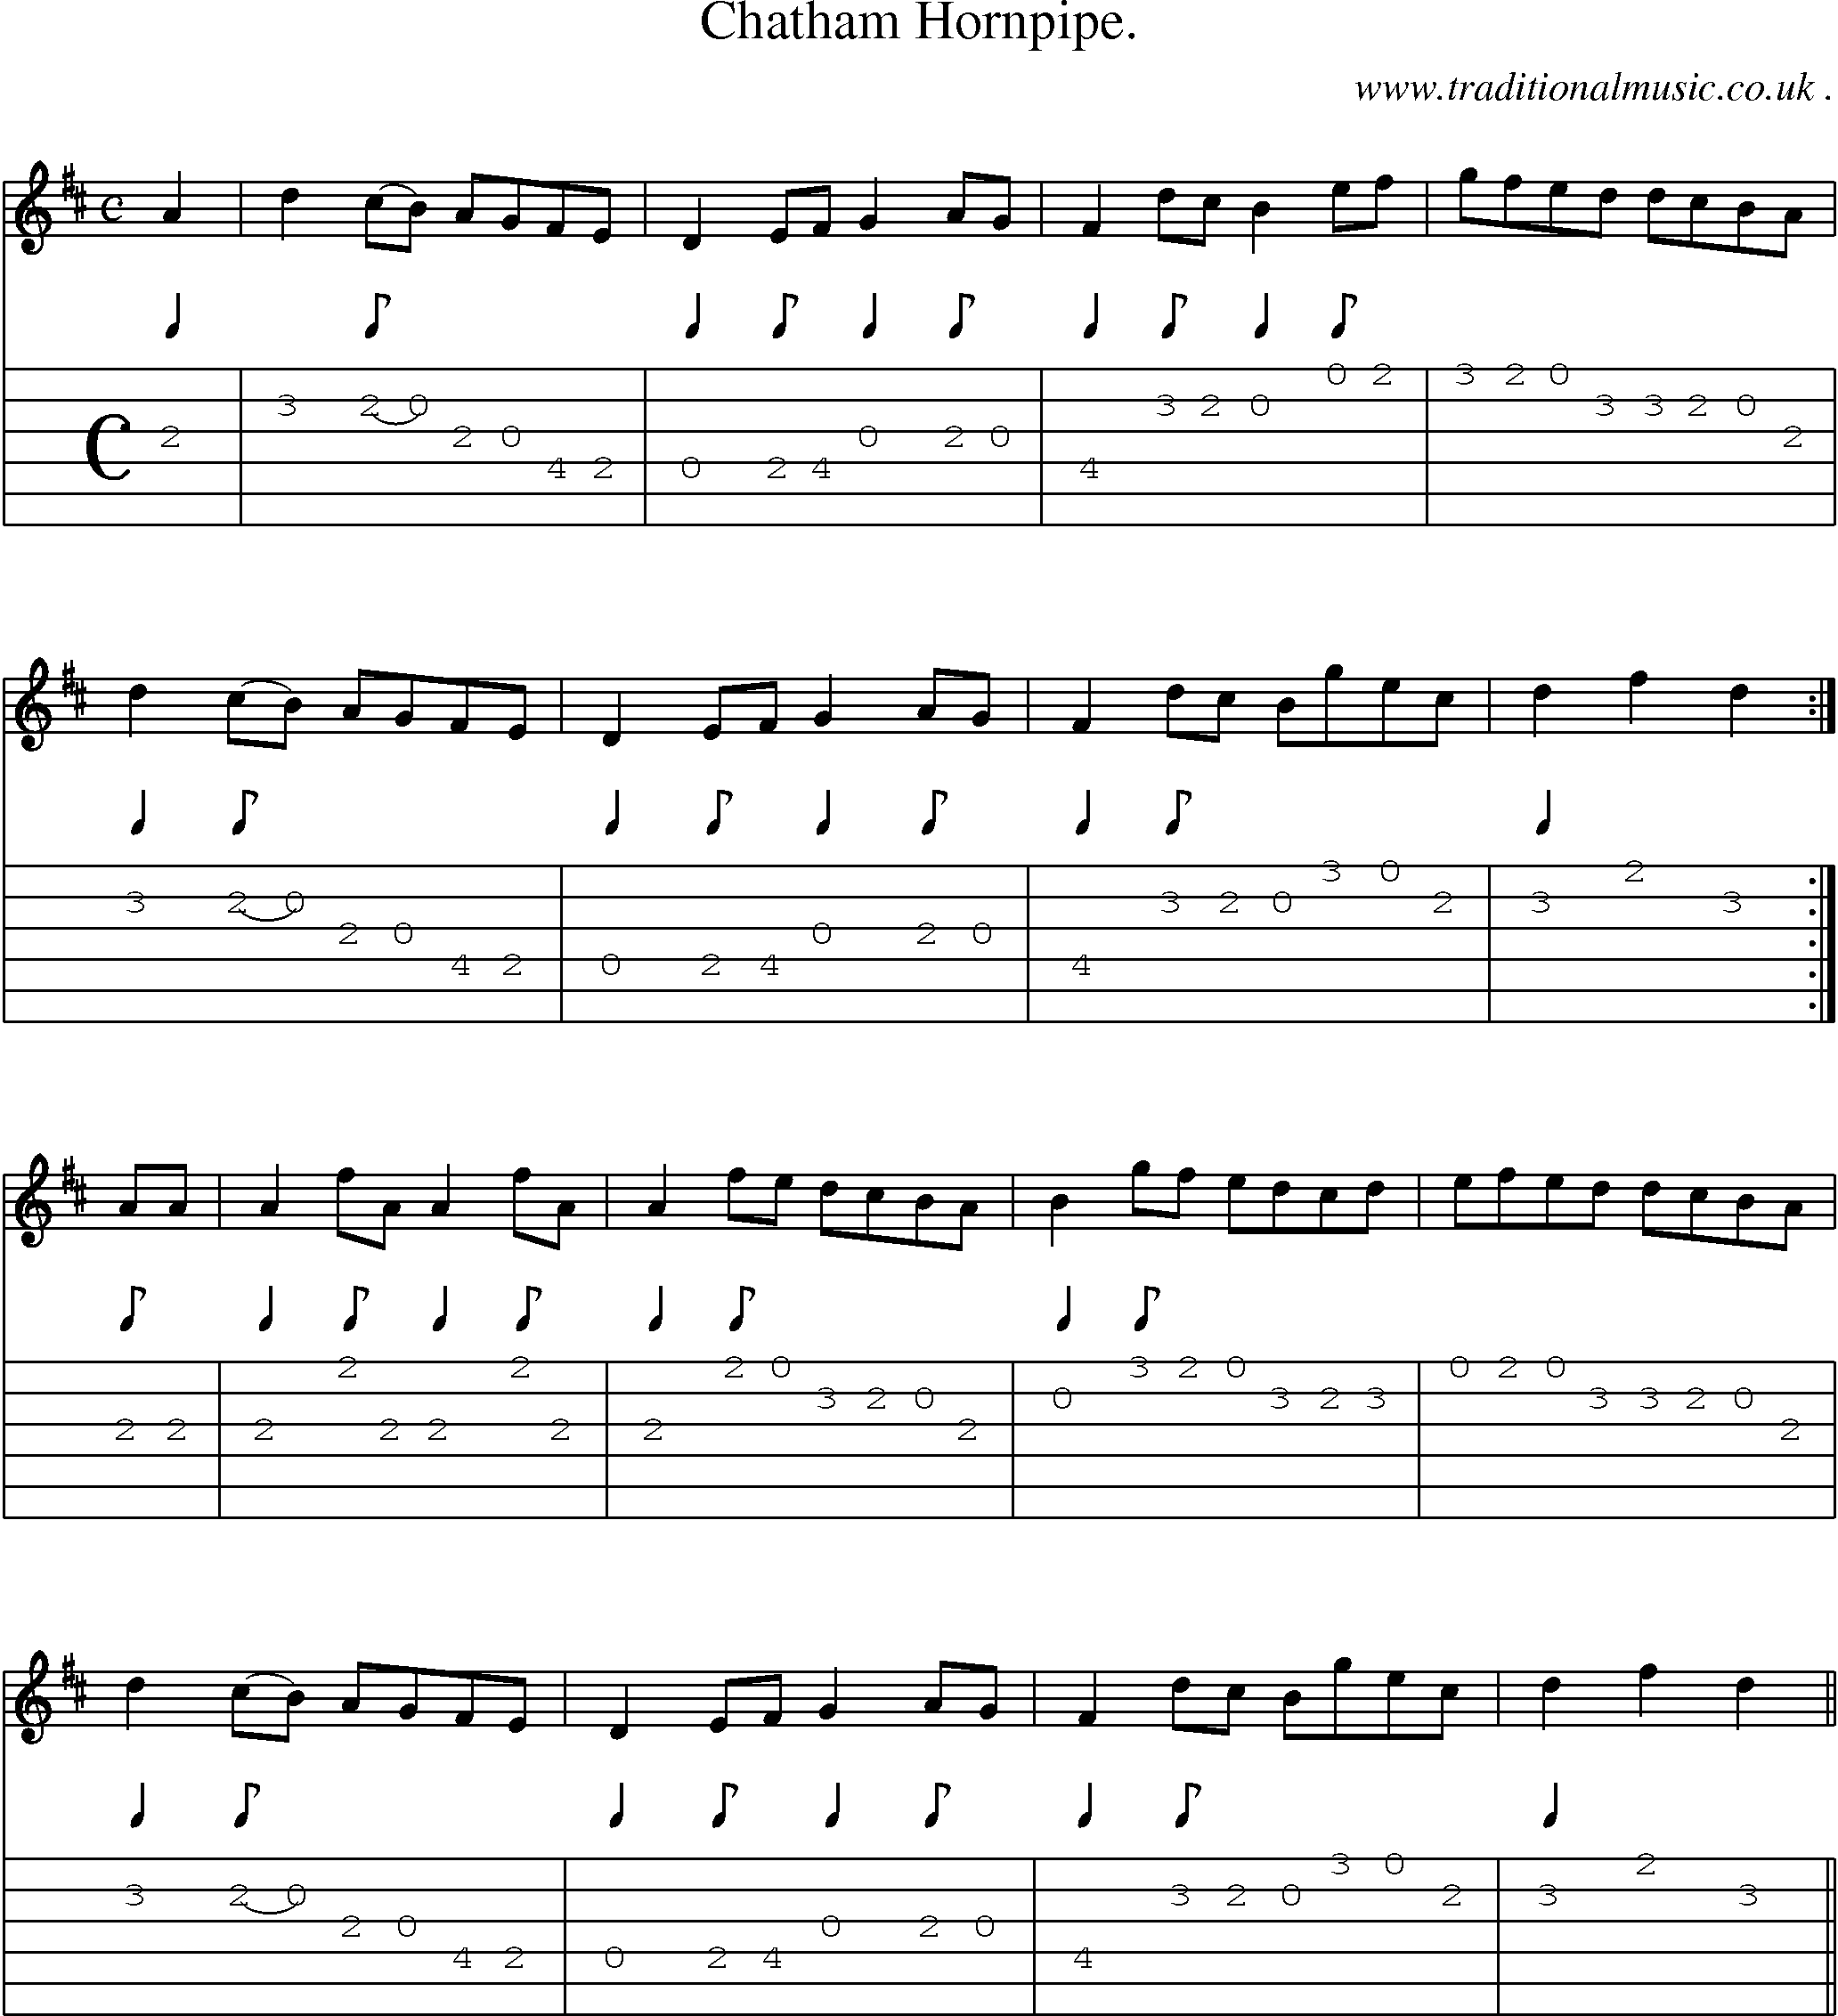 Sheet-Music and Guitar Tabs for Chatham Hornpipe